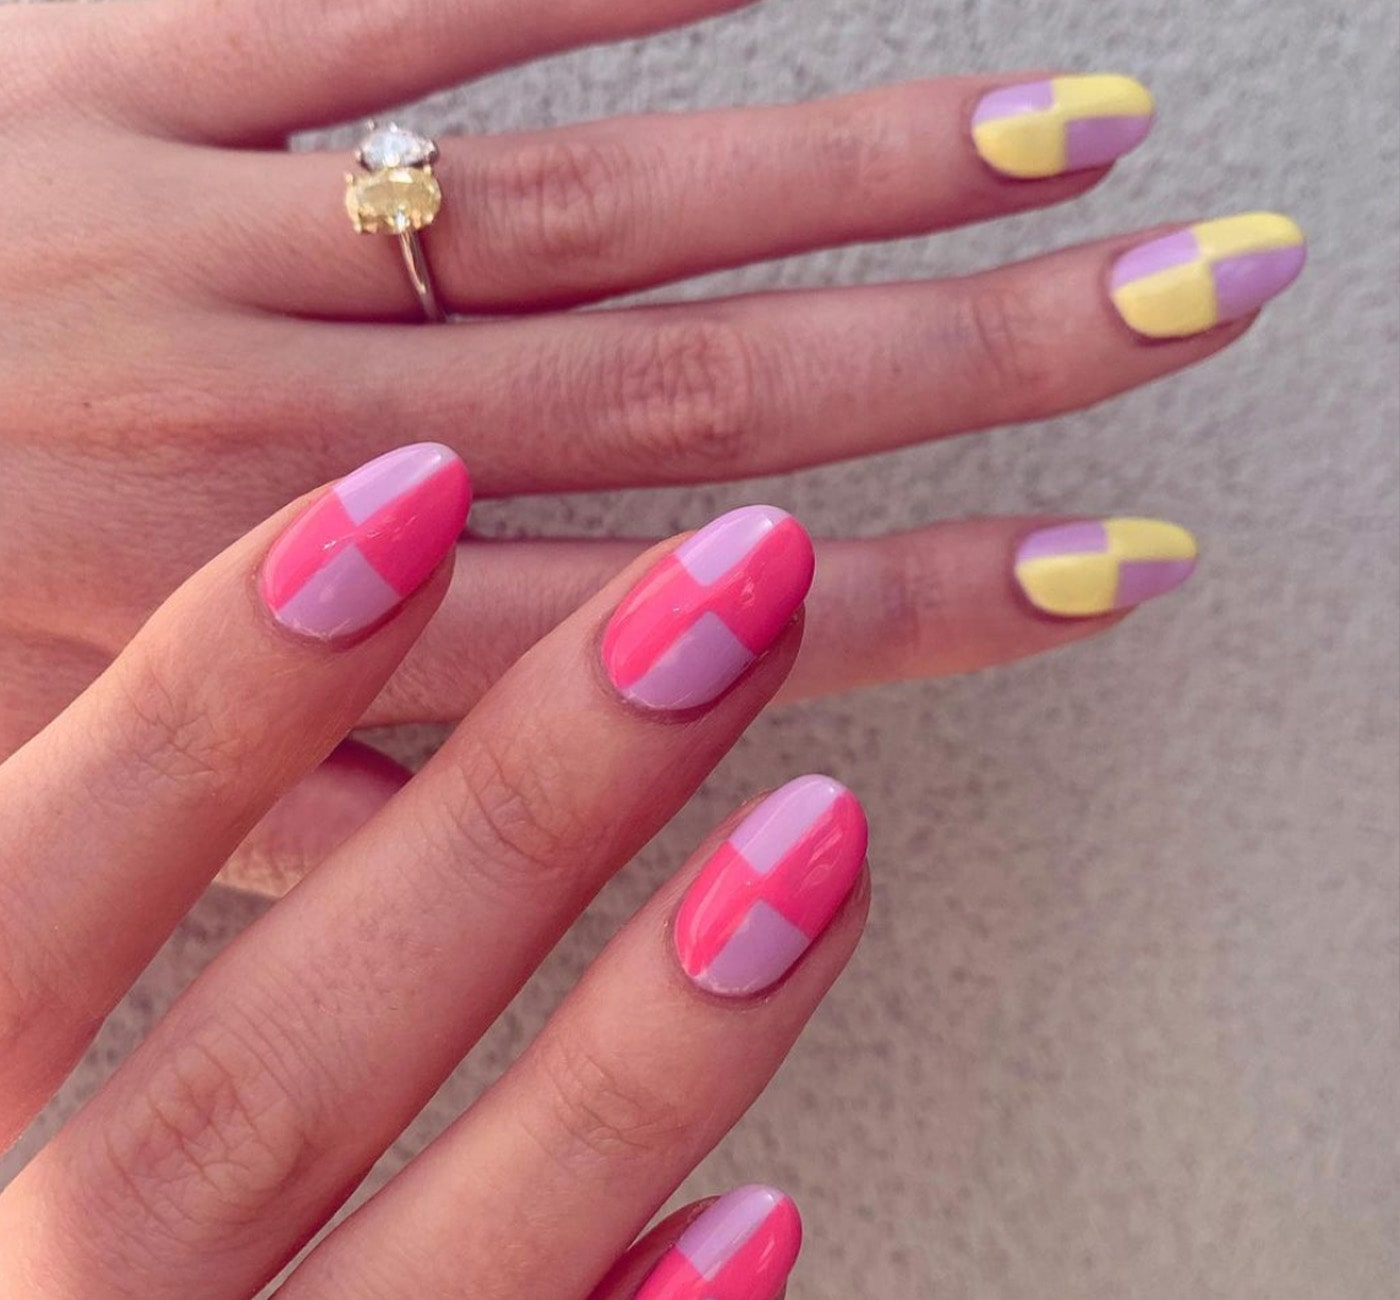 Hands with painted checker nails. One hand is yellow and pink checkered nails and the other is two tone pink checkered.